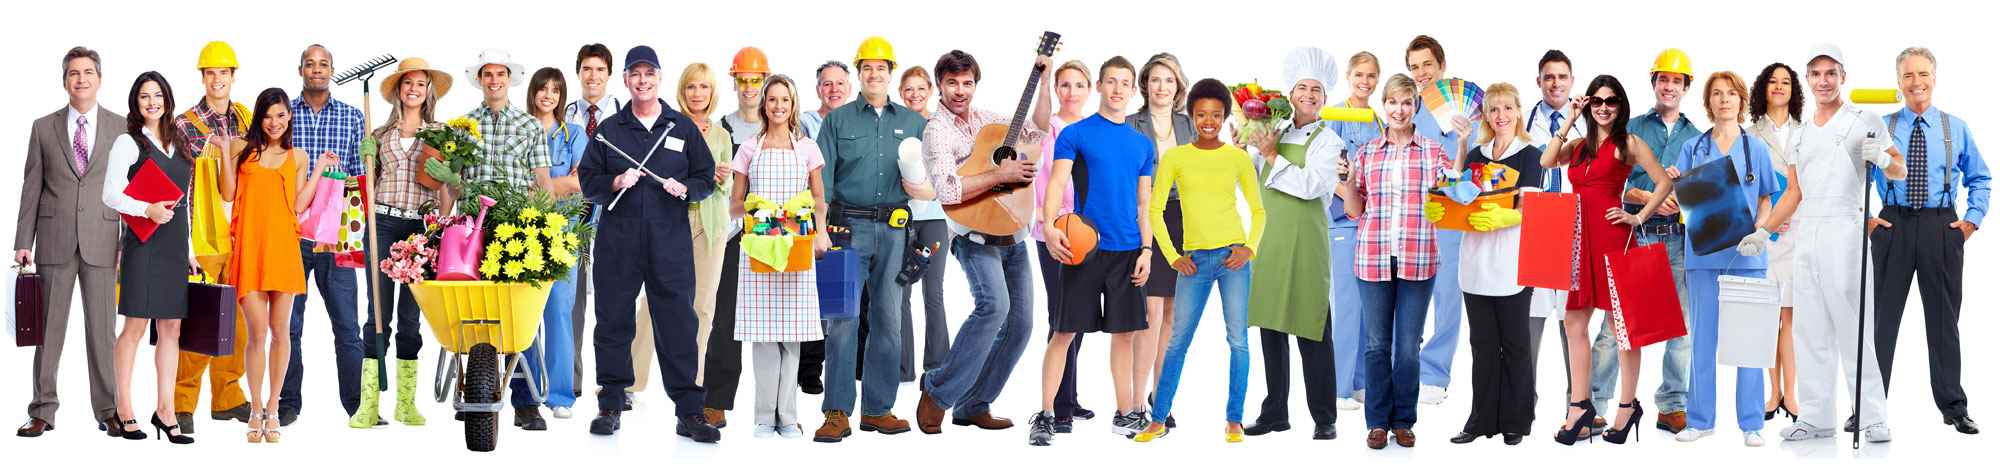 group of apprenticeships from different occupations.